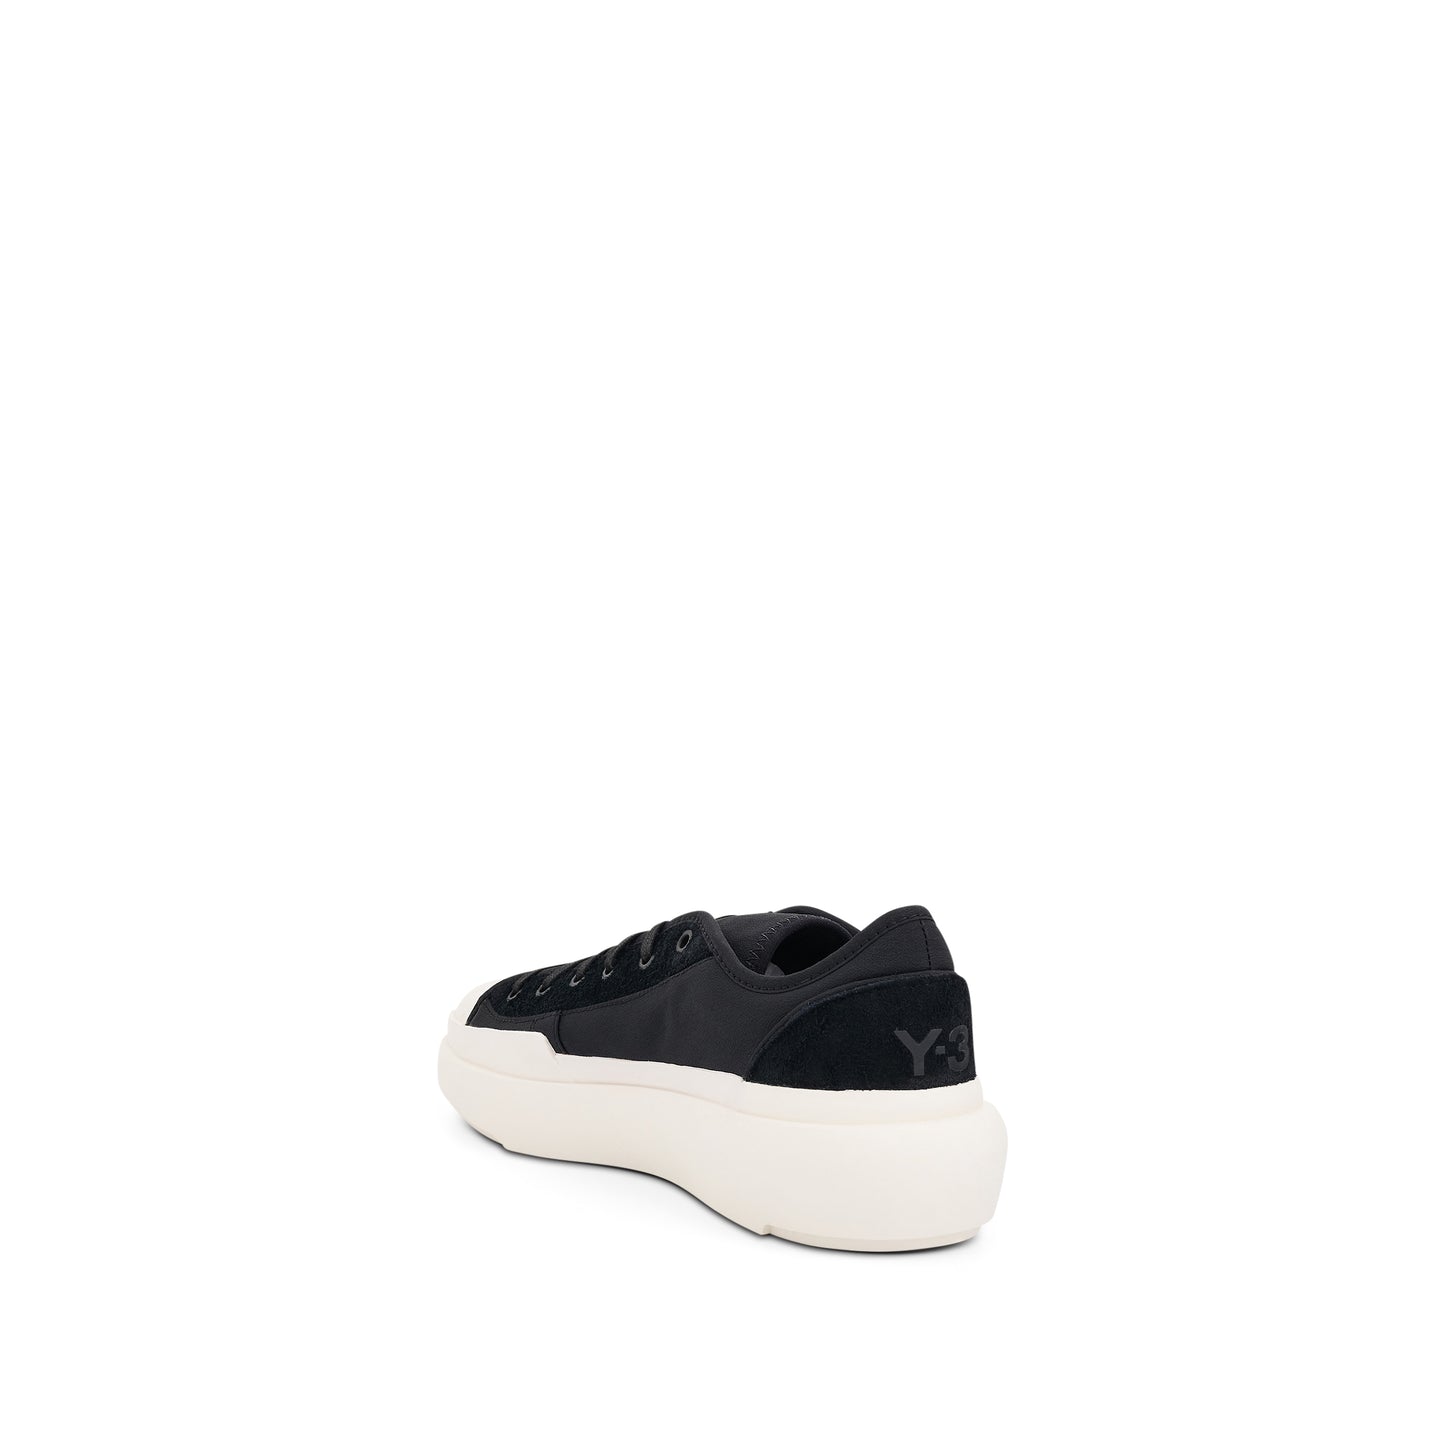 Ajatu Court Low Sneakers in Black/Off White